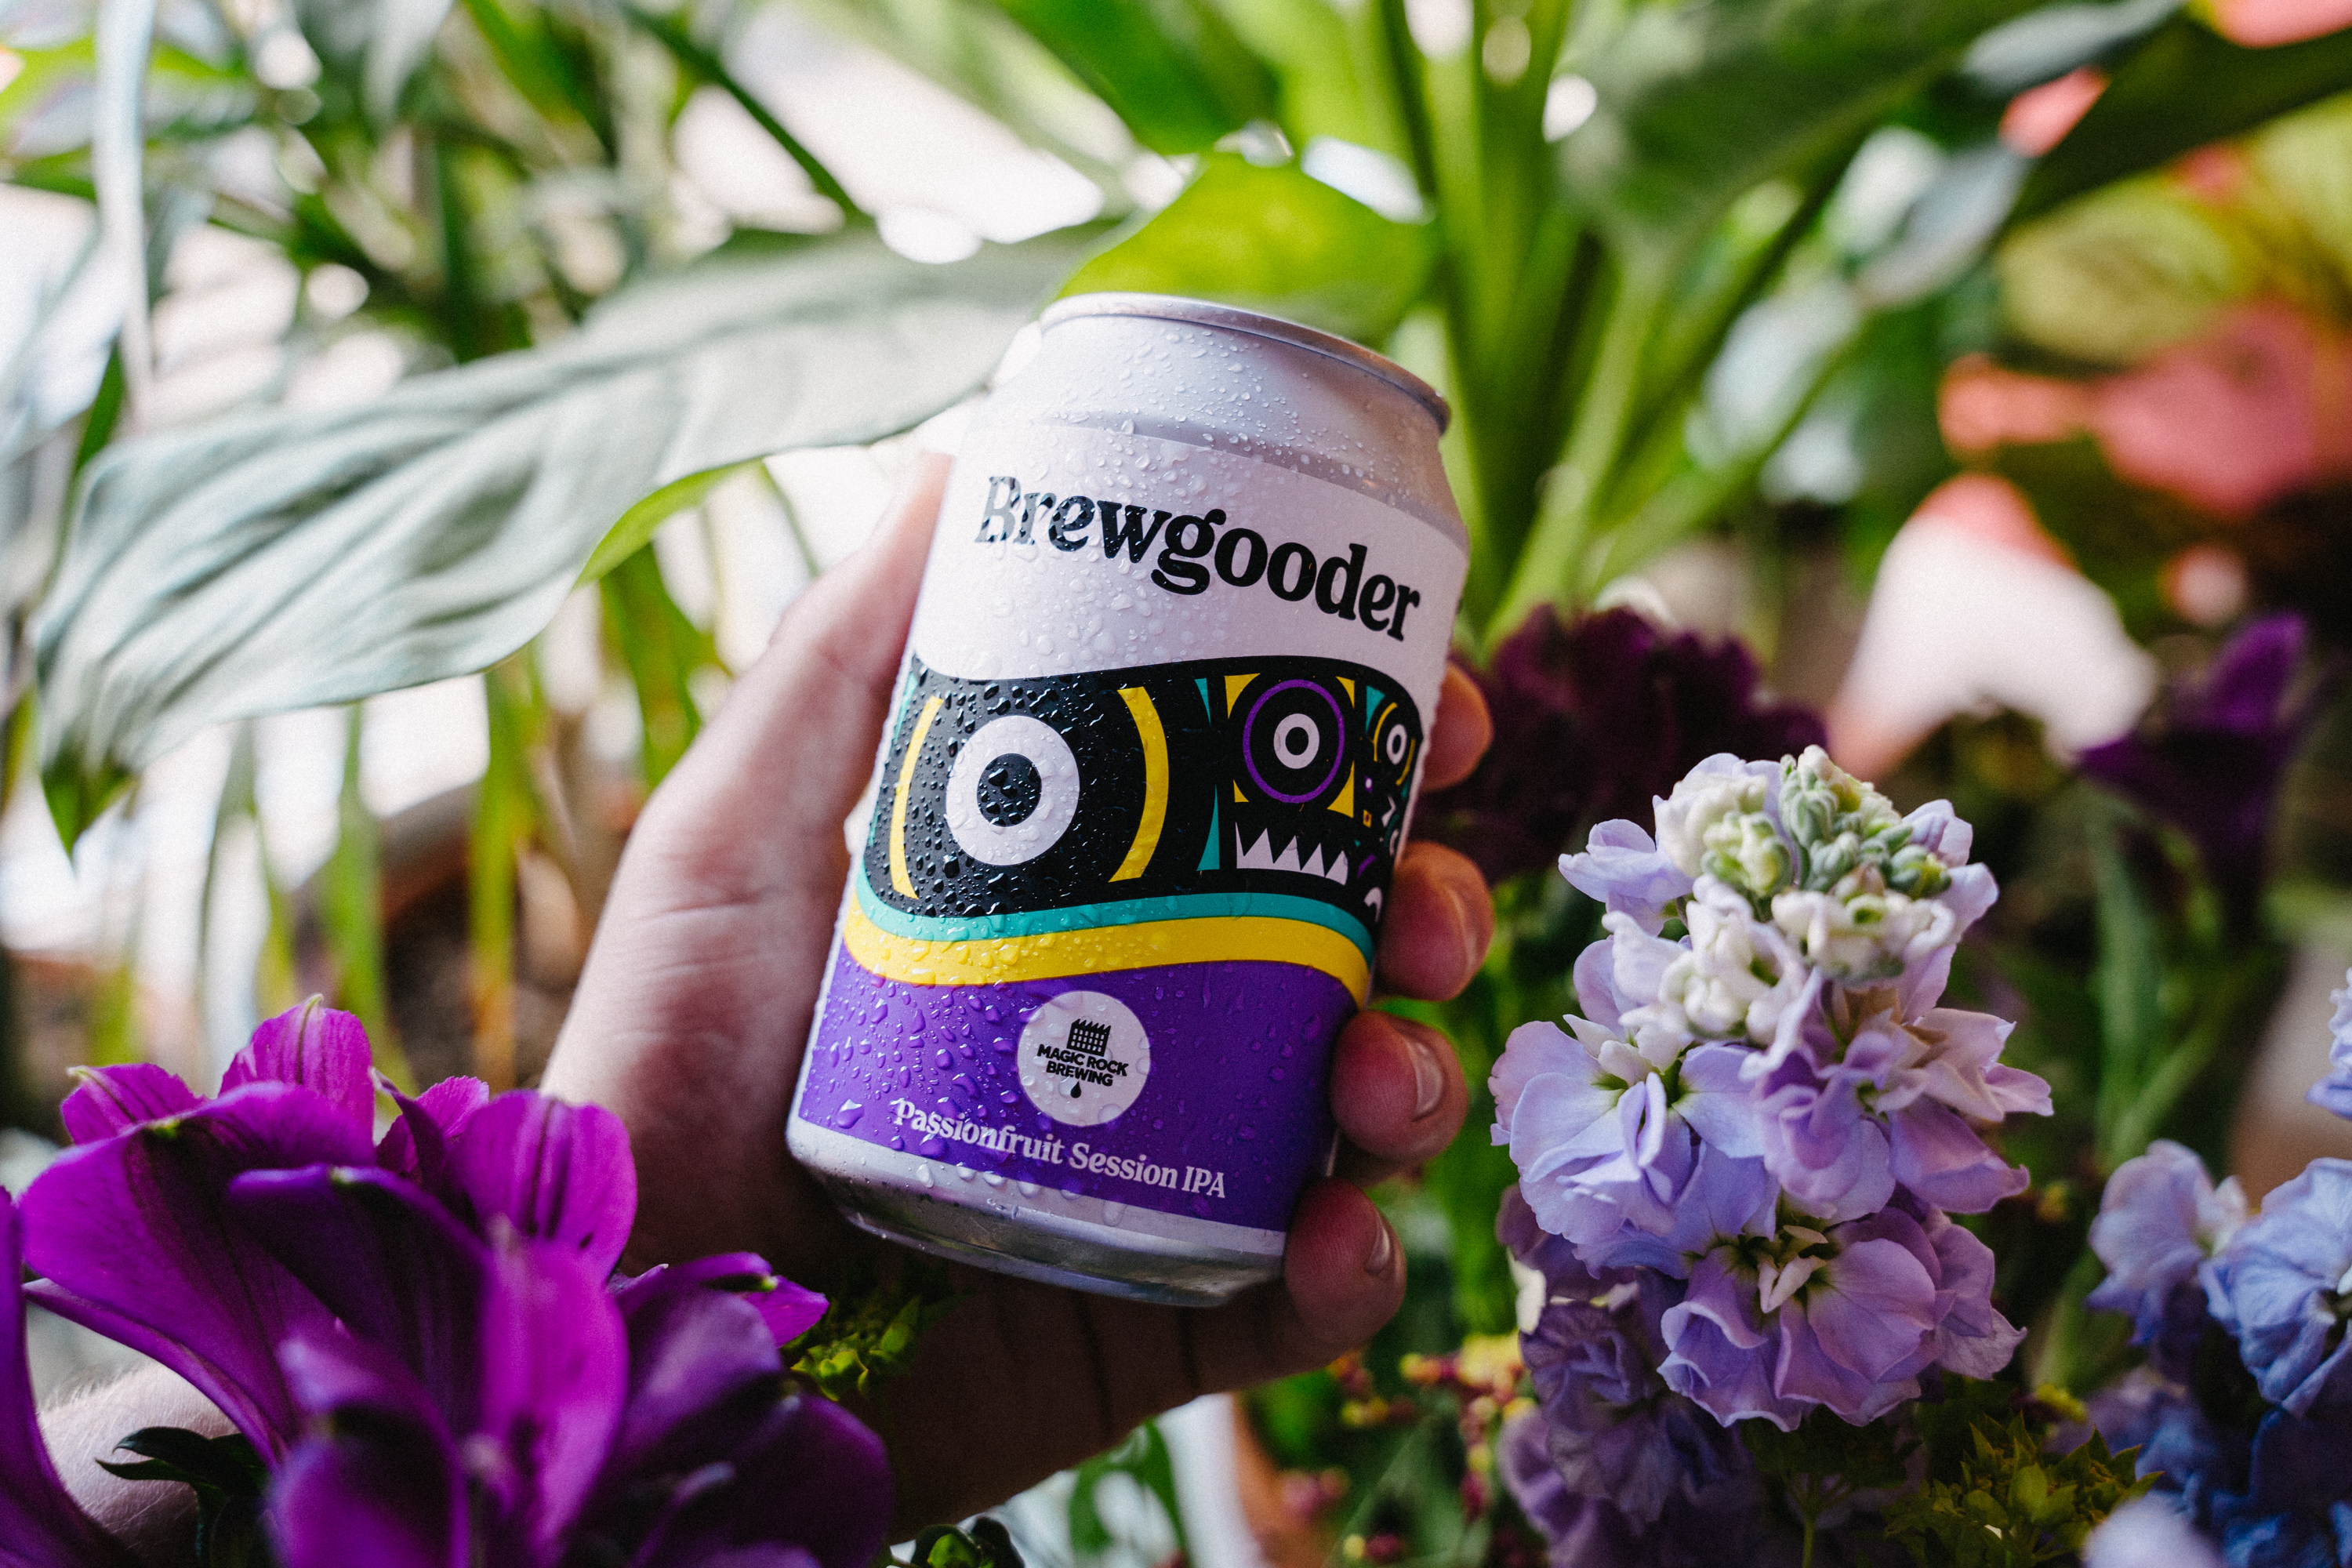 Greenshoots: Brewgooder on track to double year-on-year sales